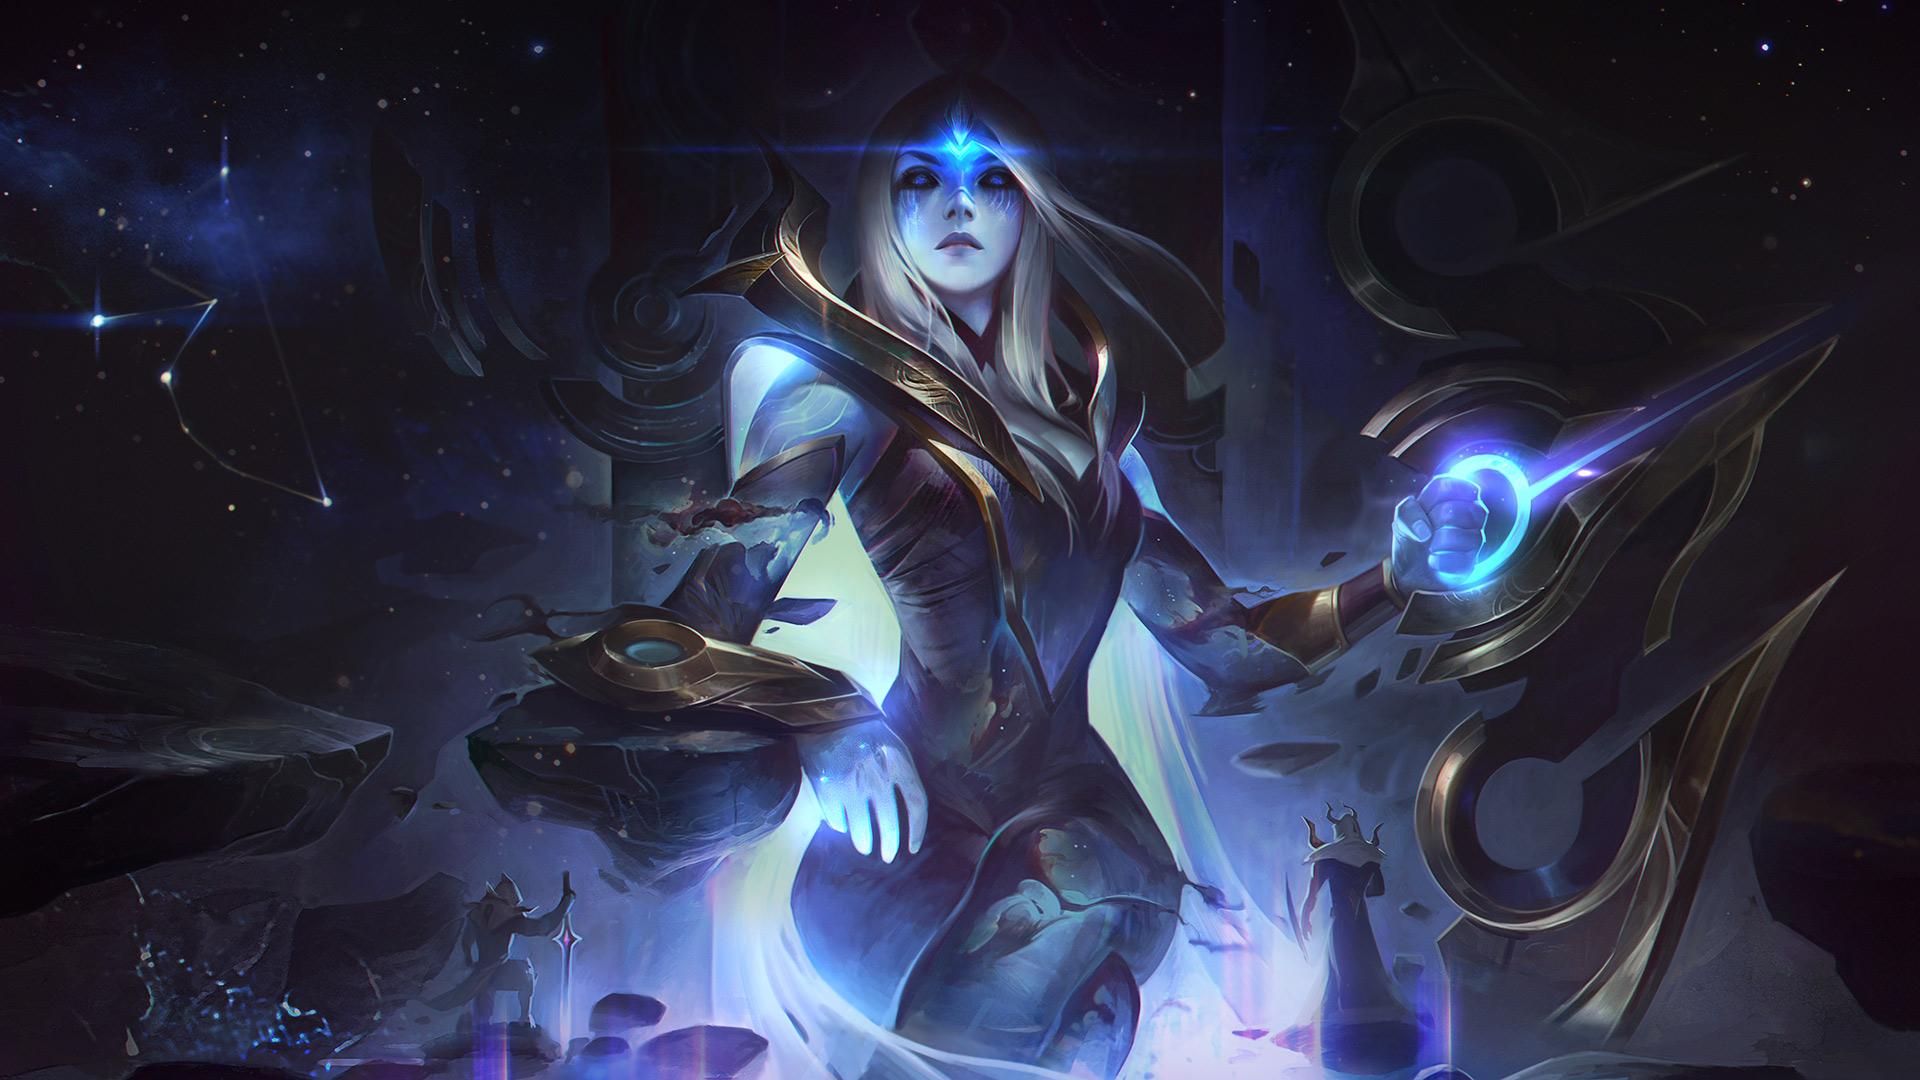 General 1920x1080 League of Legends ADC Adcarry Ashe (League of Legends) fantasy art fantasy girl video game characters video game girls PC gaming video game art fist blonde girls with guns bow